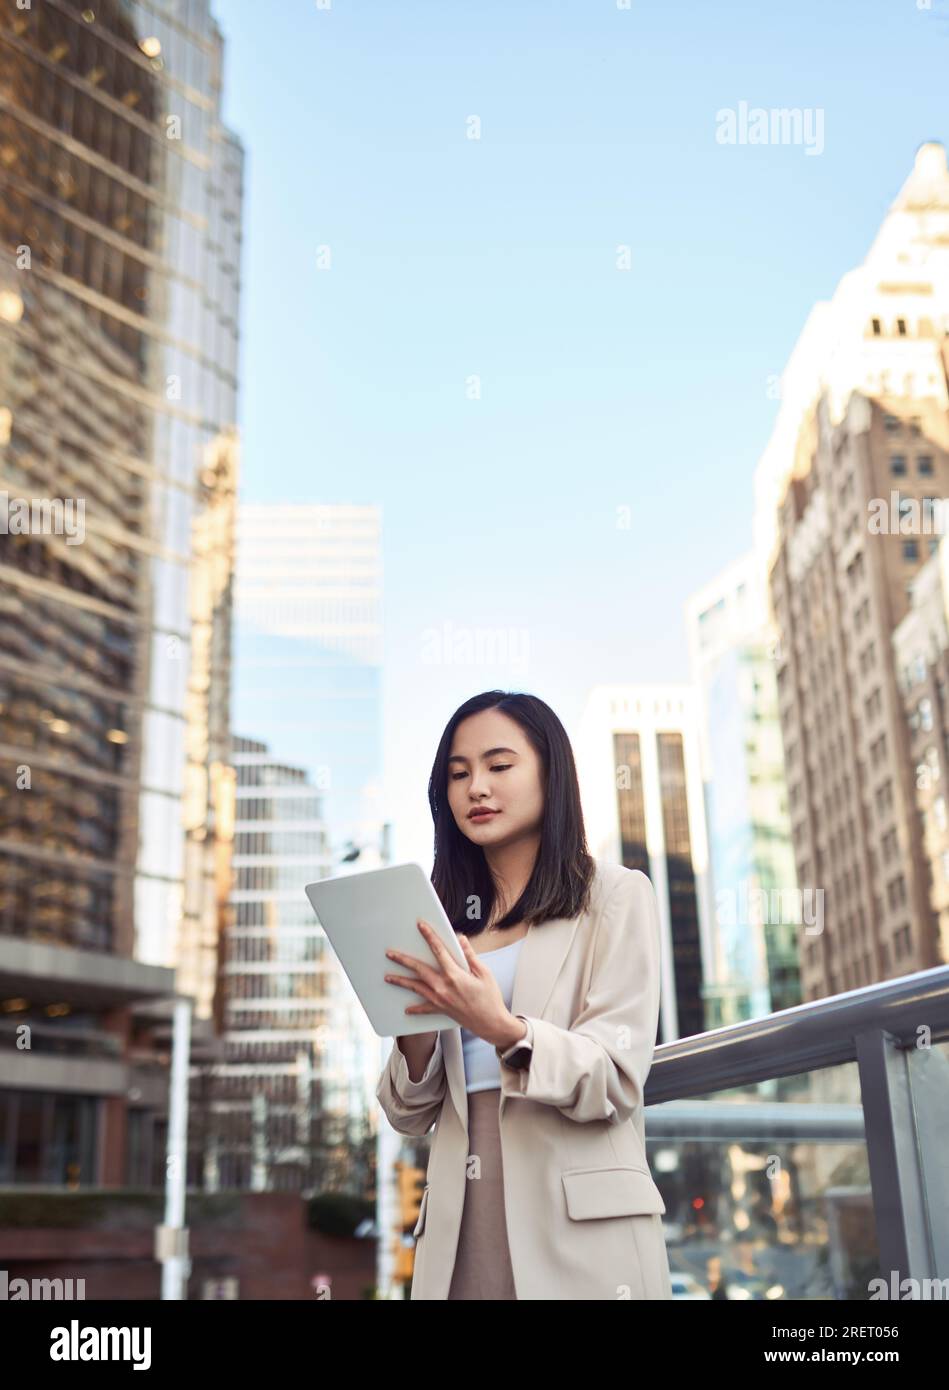 Young Asian business woman professional standing in city using tablet. Stock Photo